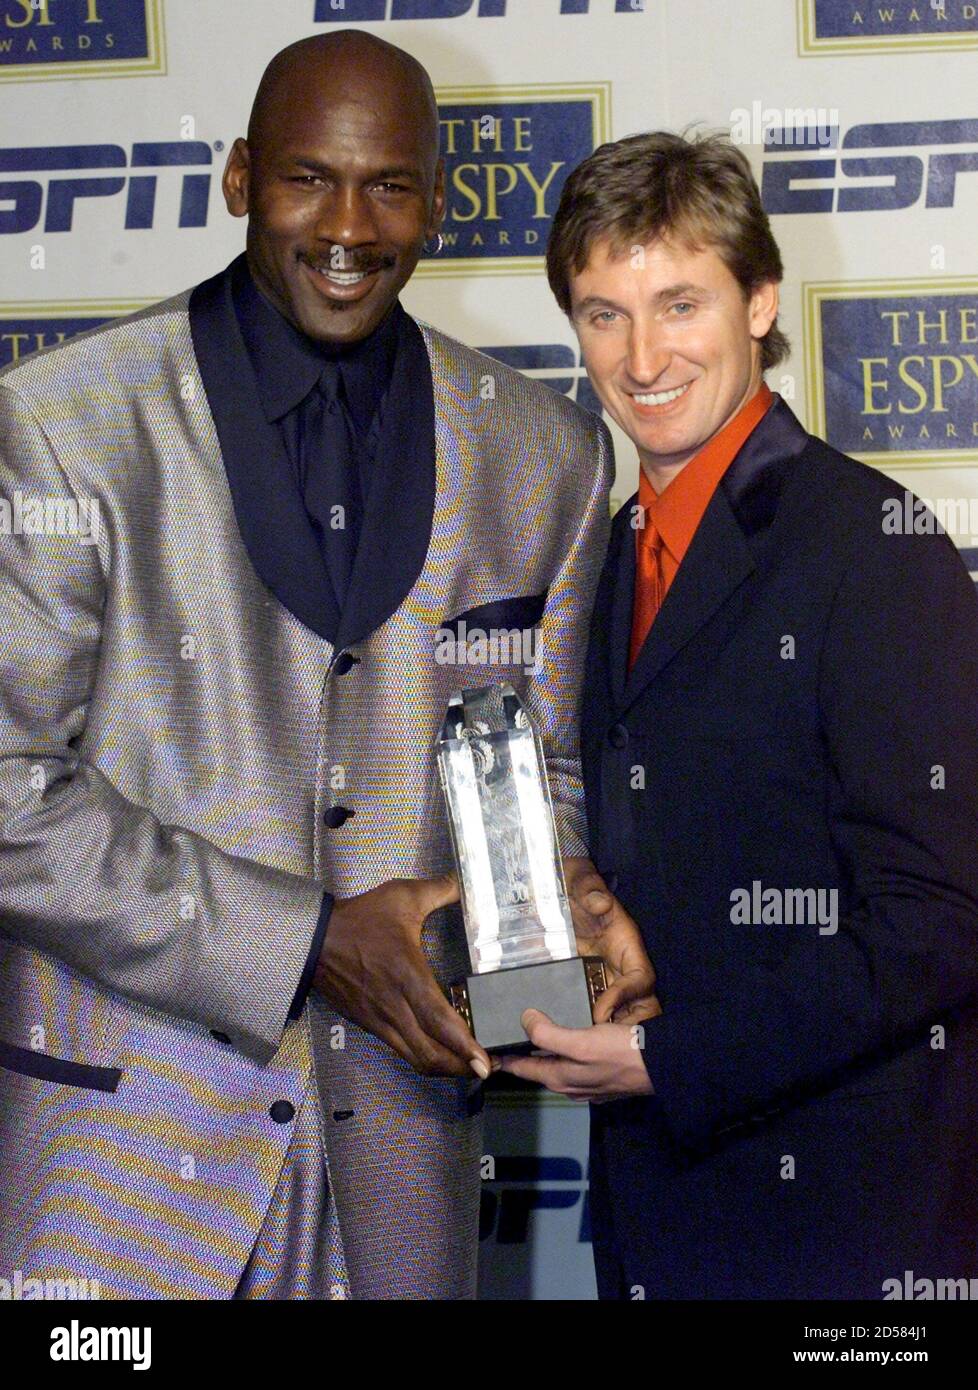 Besøg bedsteforældre omdrejningspunkt omgivet Basketball great Michael Jordan (L) and hockey legend Wayne Gretzky pose at  the eighth annual ESPY Awards show in Las Vegas February 14. Jordan was the  only athlete to receive two inaugural